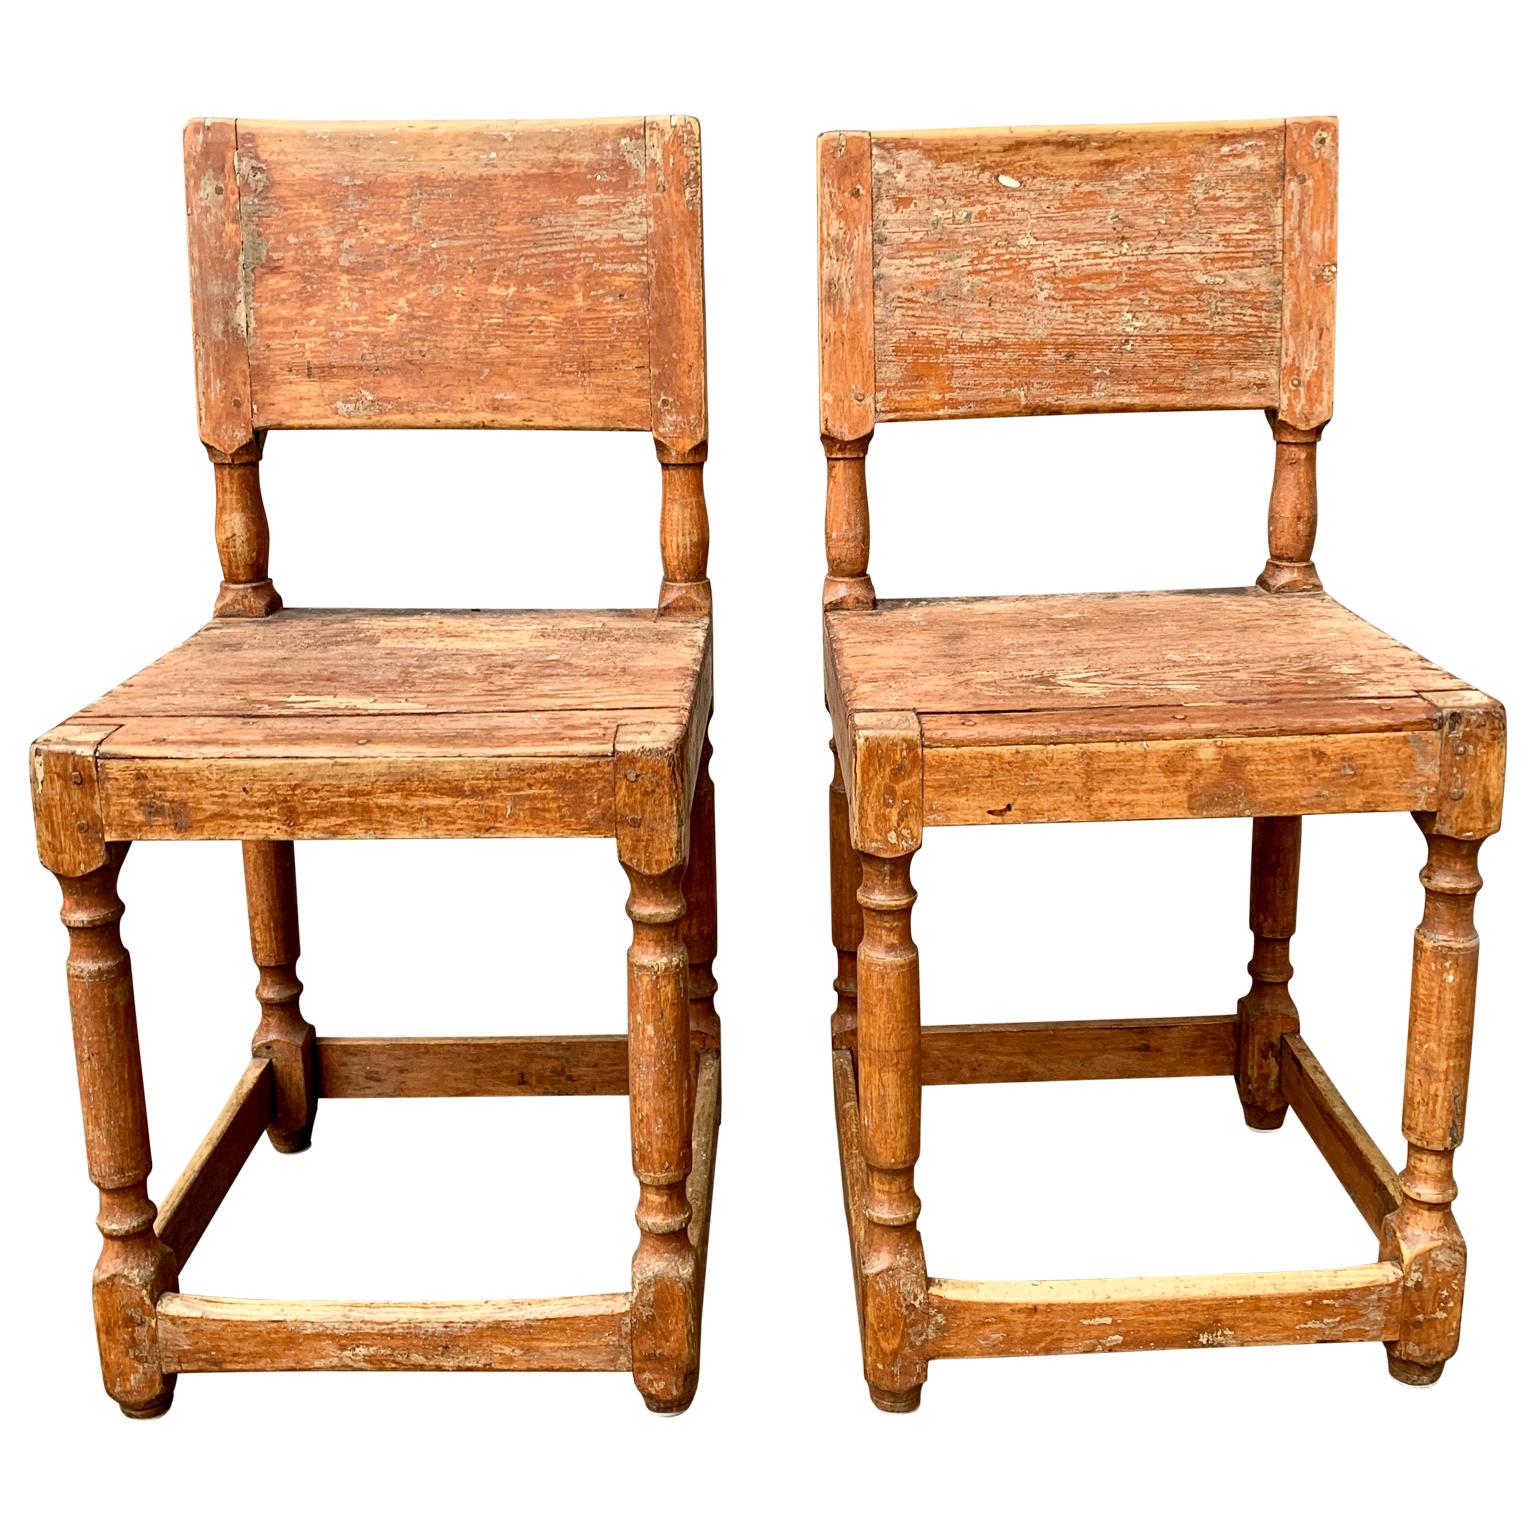 A pair of early 19th century Folk Art chairs from Northern Sweden. The chairs retain the original old charming patina and paint. This characterizes the few antique pieces of Swedish furniture remaining with the untouched look.

